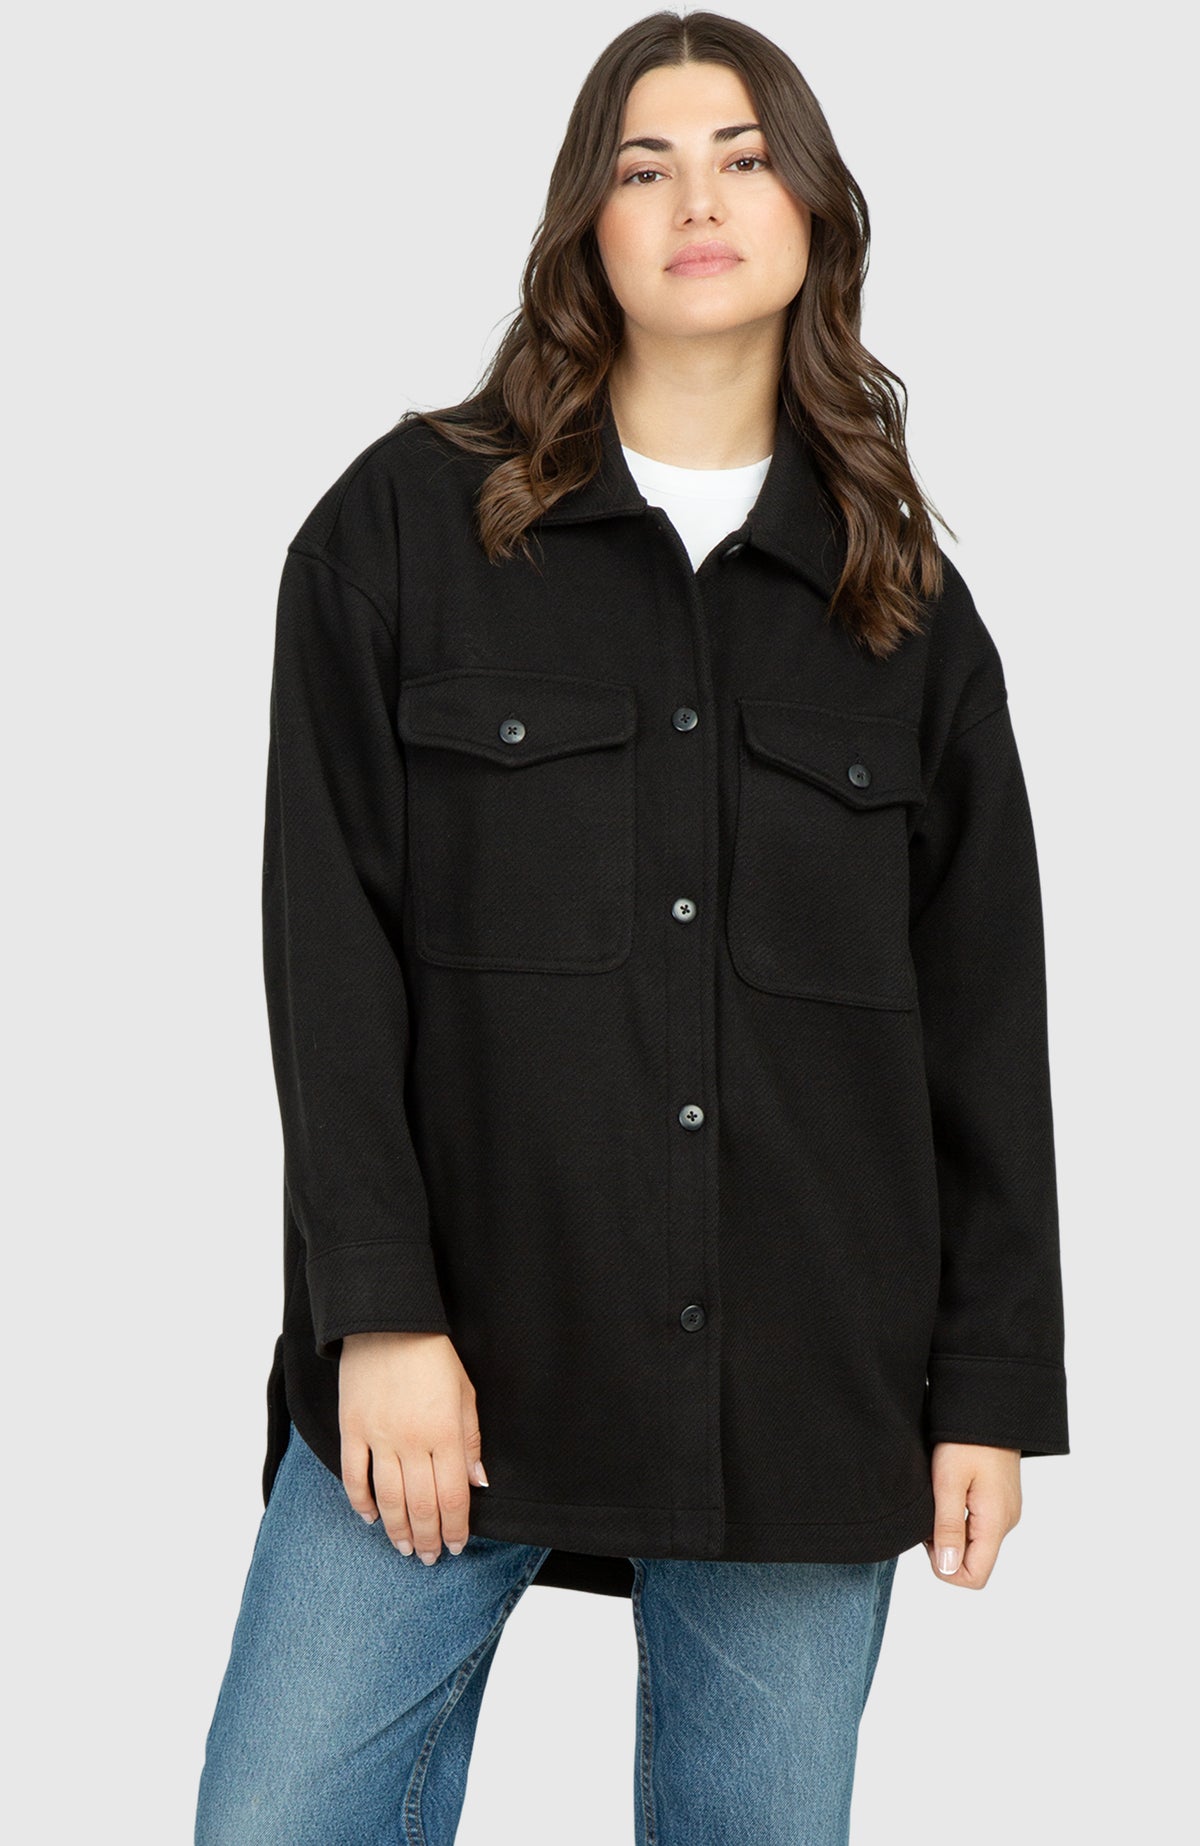 Smokey Black Oversized Twill Knit Shacket for Women - Front Buttoned Up